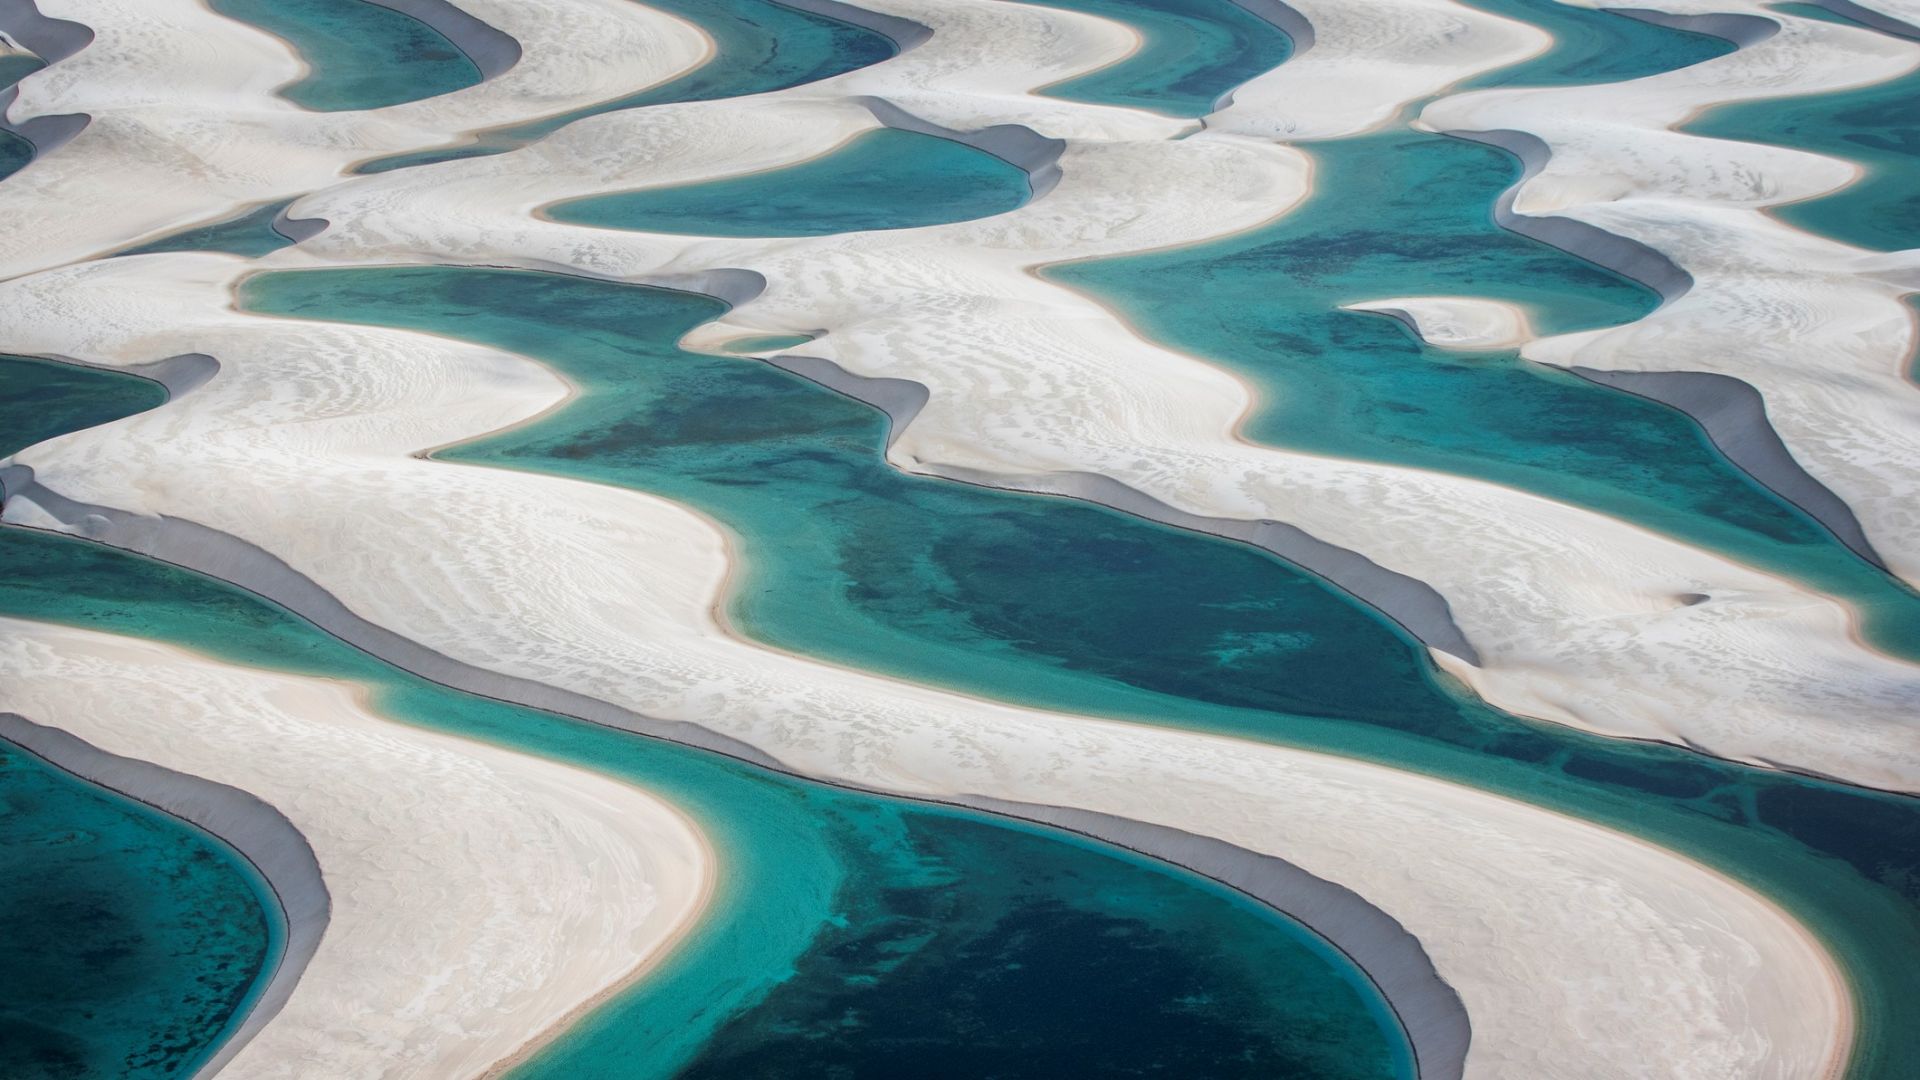 <p>                     Lençois Maranhenses National Park contains vast swathes of white dunes sweeping across the otherworldly landscape. According to the travel website Lonely Planet, from May to September rainwater fills the crystal-clear pools, which are offset by striking white dunes.                    </p>                                      <p>                     The enchanting dunescape stretches over 43 miles (70 km) along the coast and over 30 miles (50 km) inland. Lençois translates as "bedsheets" in Portuguese and refers to the rolling white dunes that dominate the landscape.                    </p>                                      <p>                     The national park is best visited in June, July and August, when the lagoons are at their best, according to Lonely Planet.                   </p>